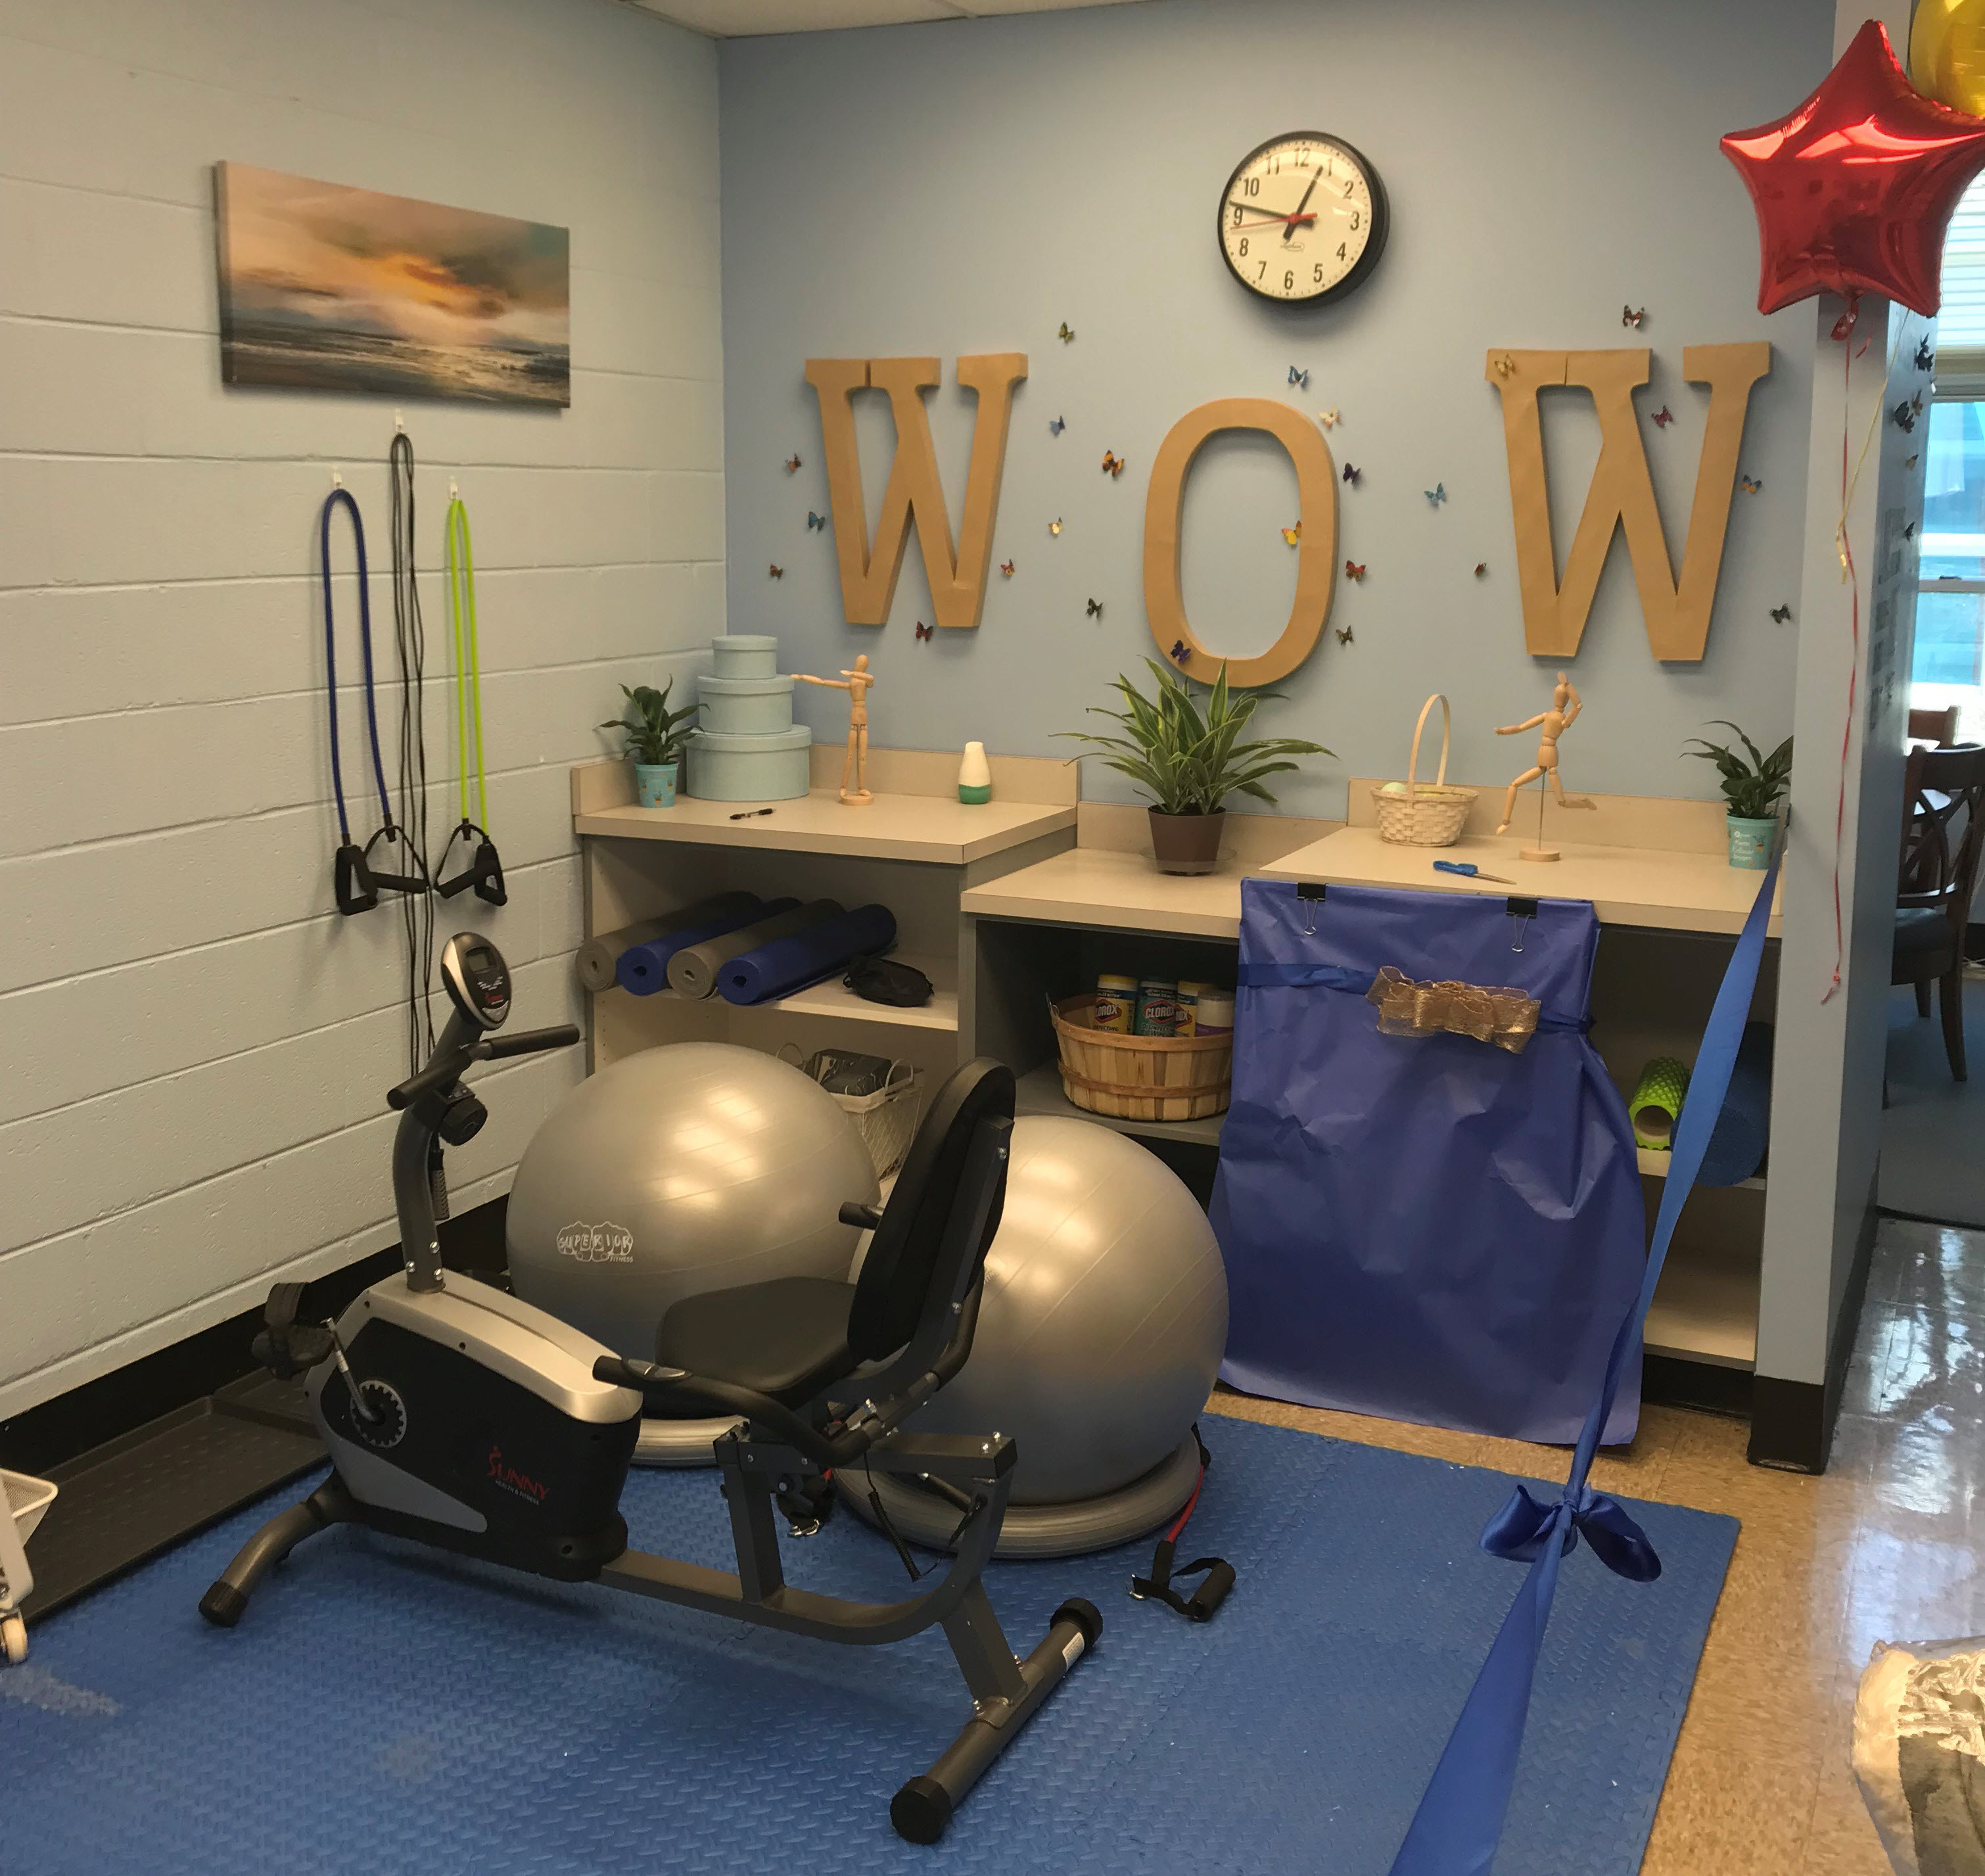 Working on Wellness: Minigrant Helps Open Center for Teachers and Staff in Maryland